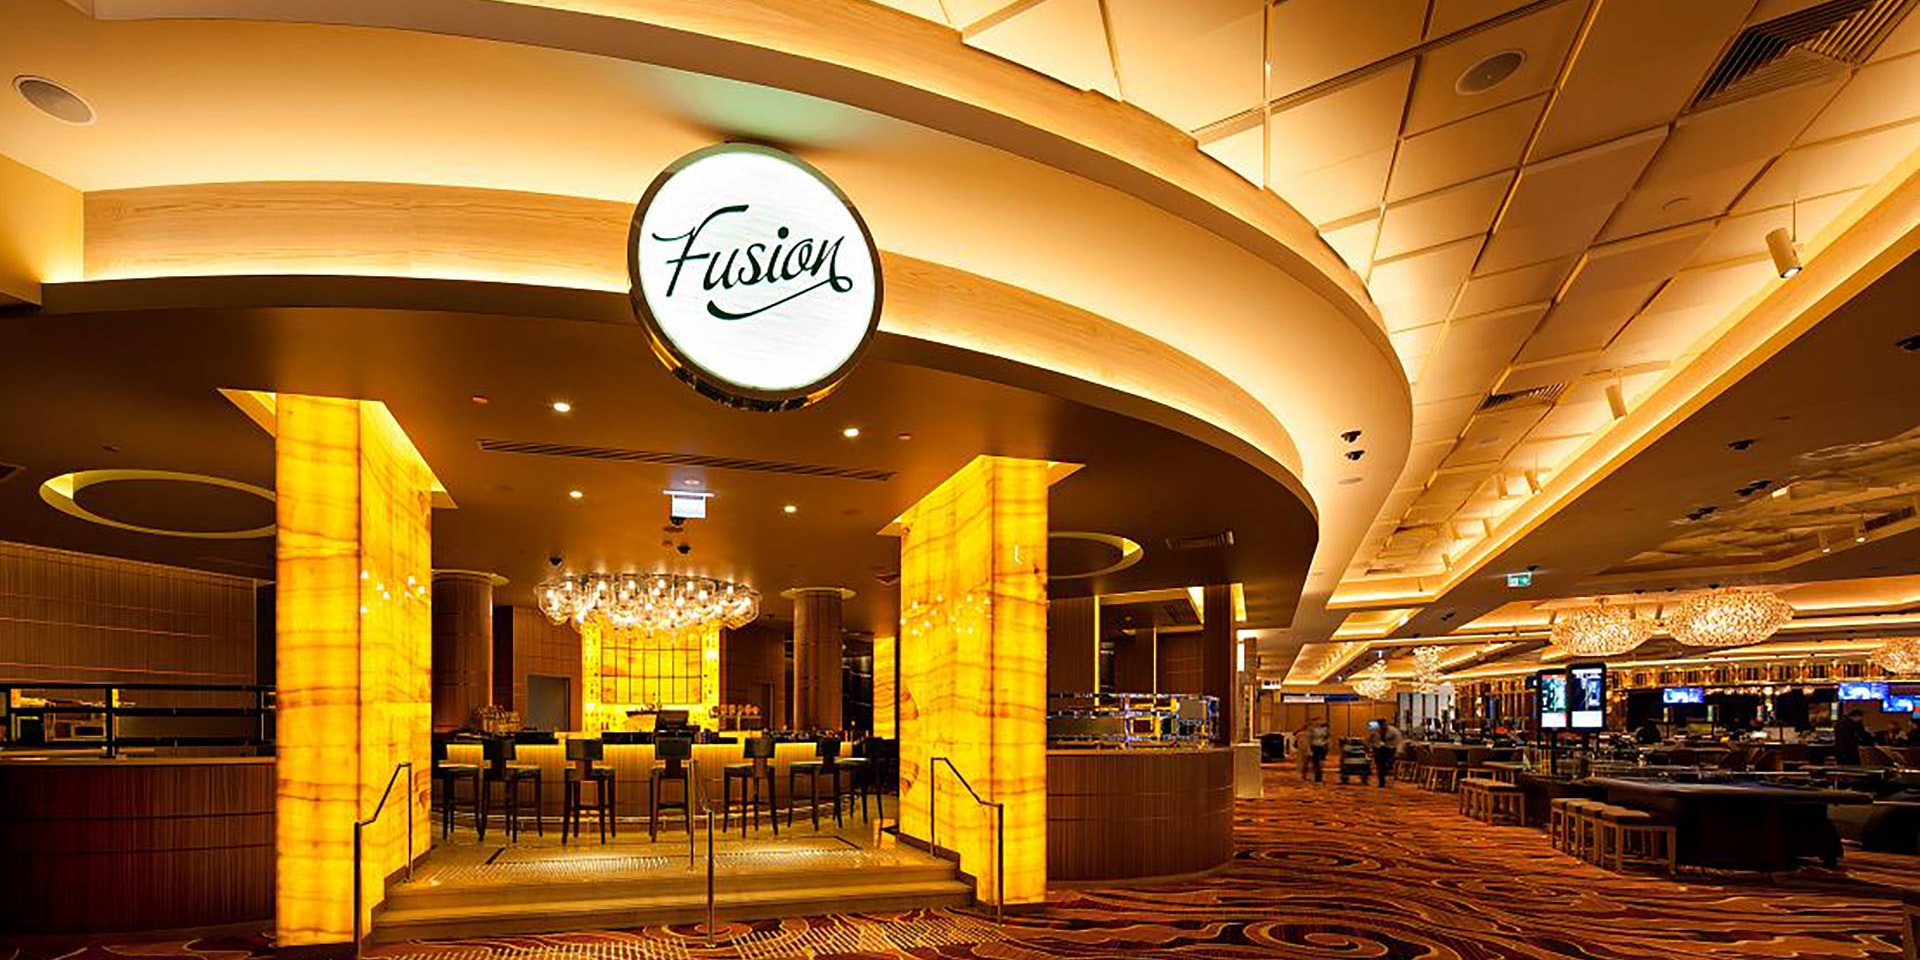 Aduro high-performance indirect LED strip in application, installed in the Crown Casino in Perth. Beautiful architectural lighting with a high CRI. 